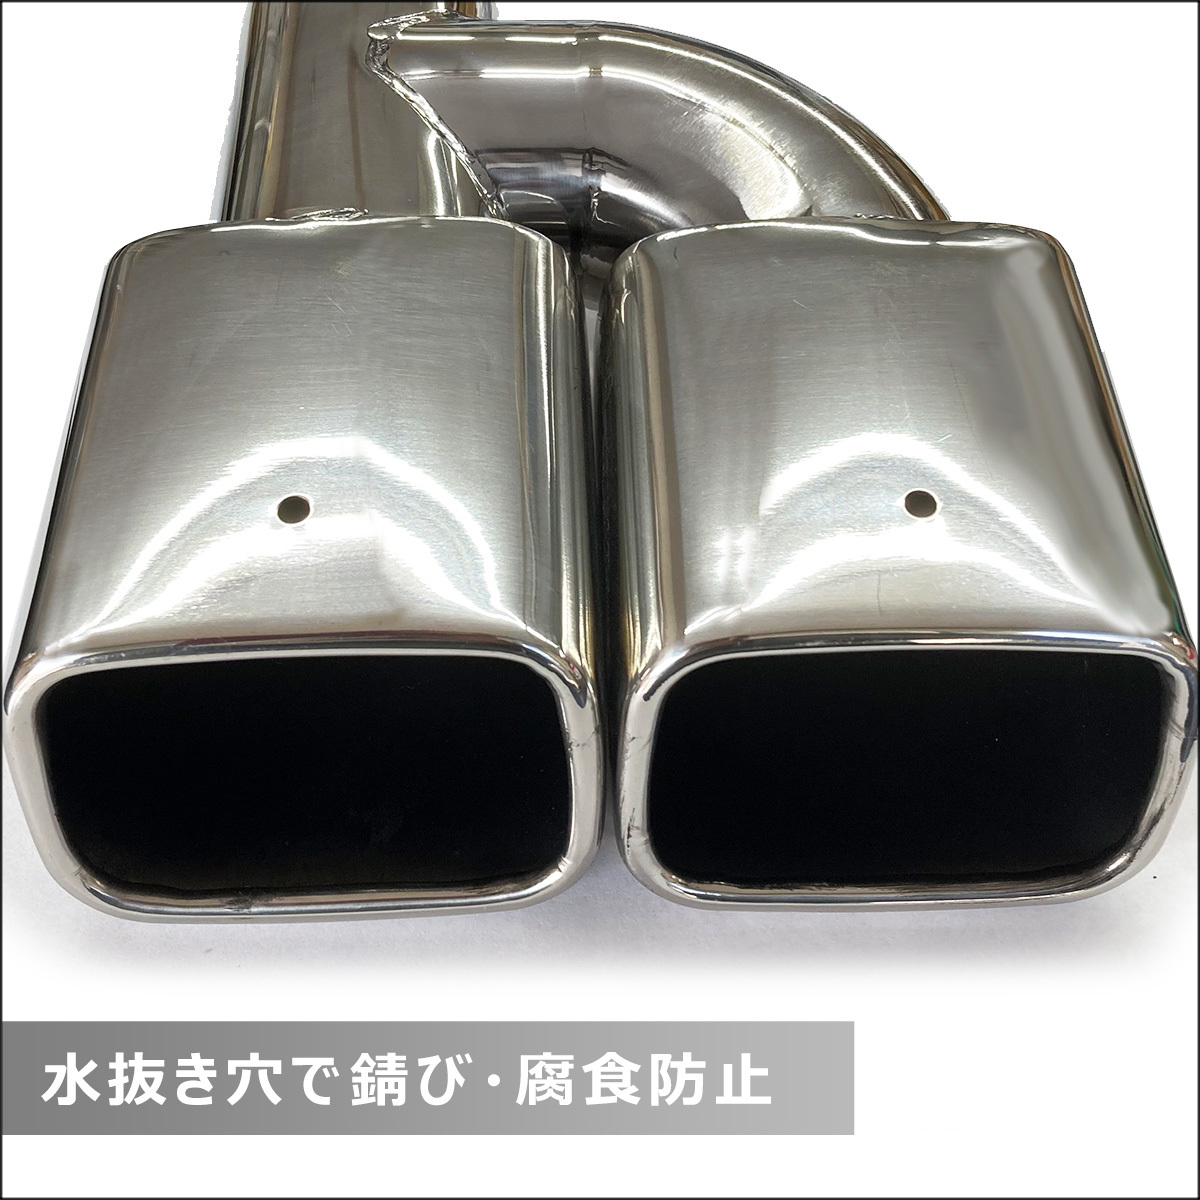 80 series Noah Voxy Esquire exclusive use Modellista correspondence muffler cutter square 2 pipe out stainless steel silver 